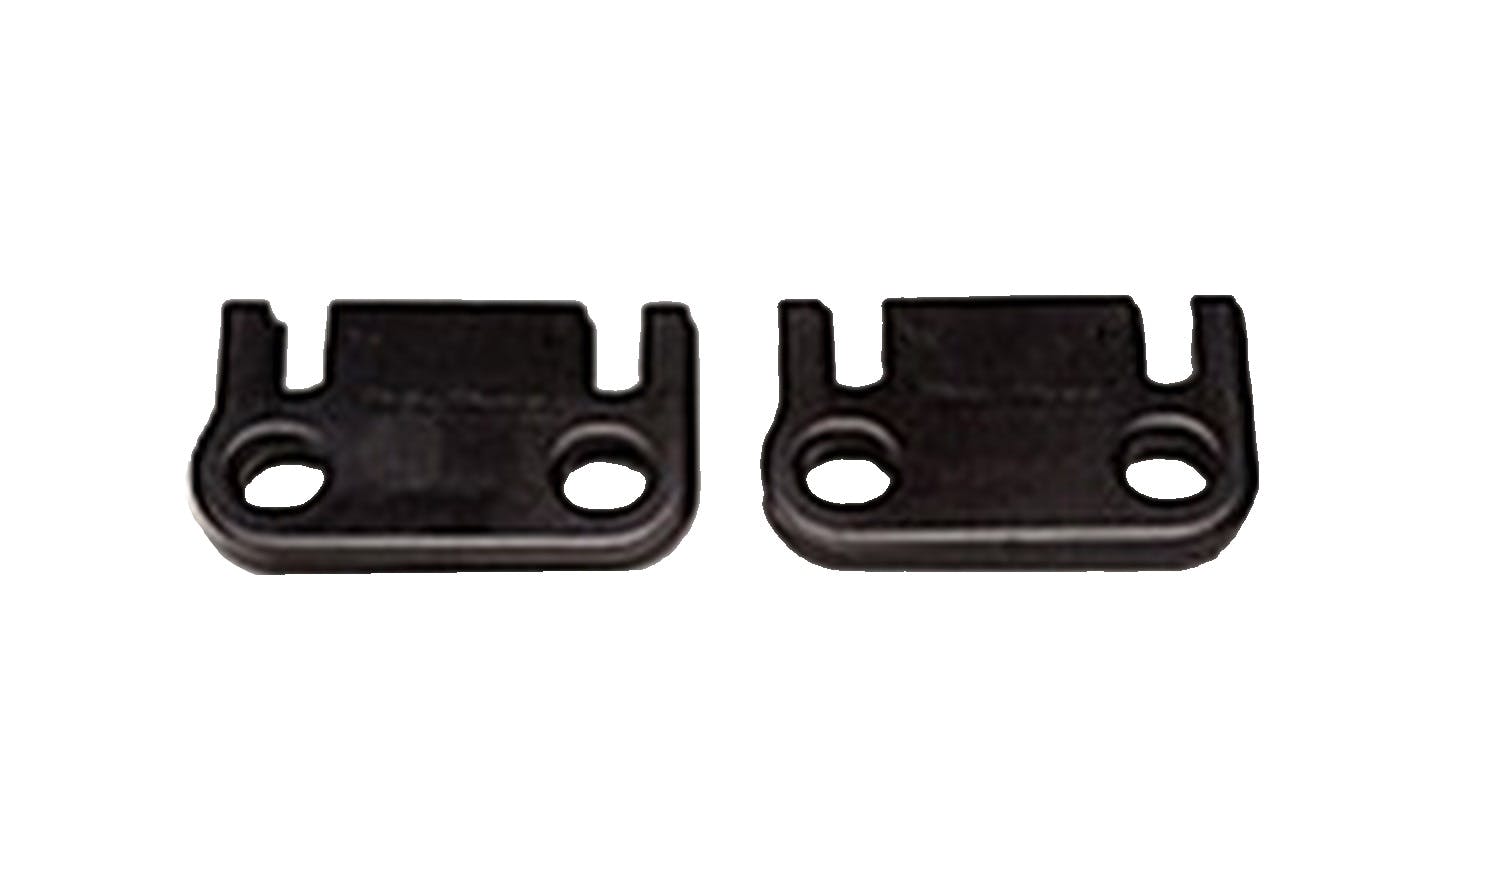 Edelbrock 93669 REPLACEMENT GUIDEPLATES FOR #6066/667